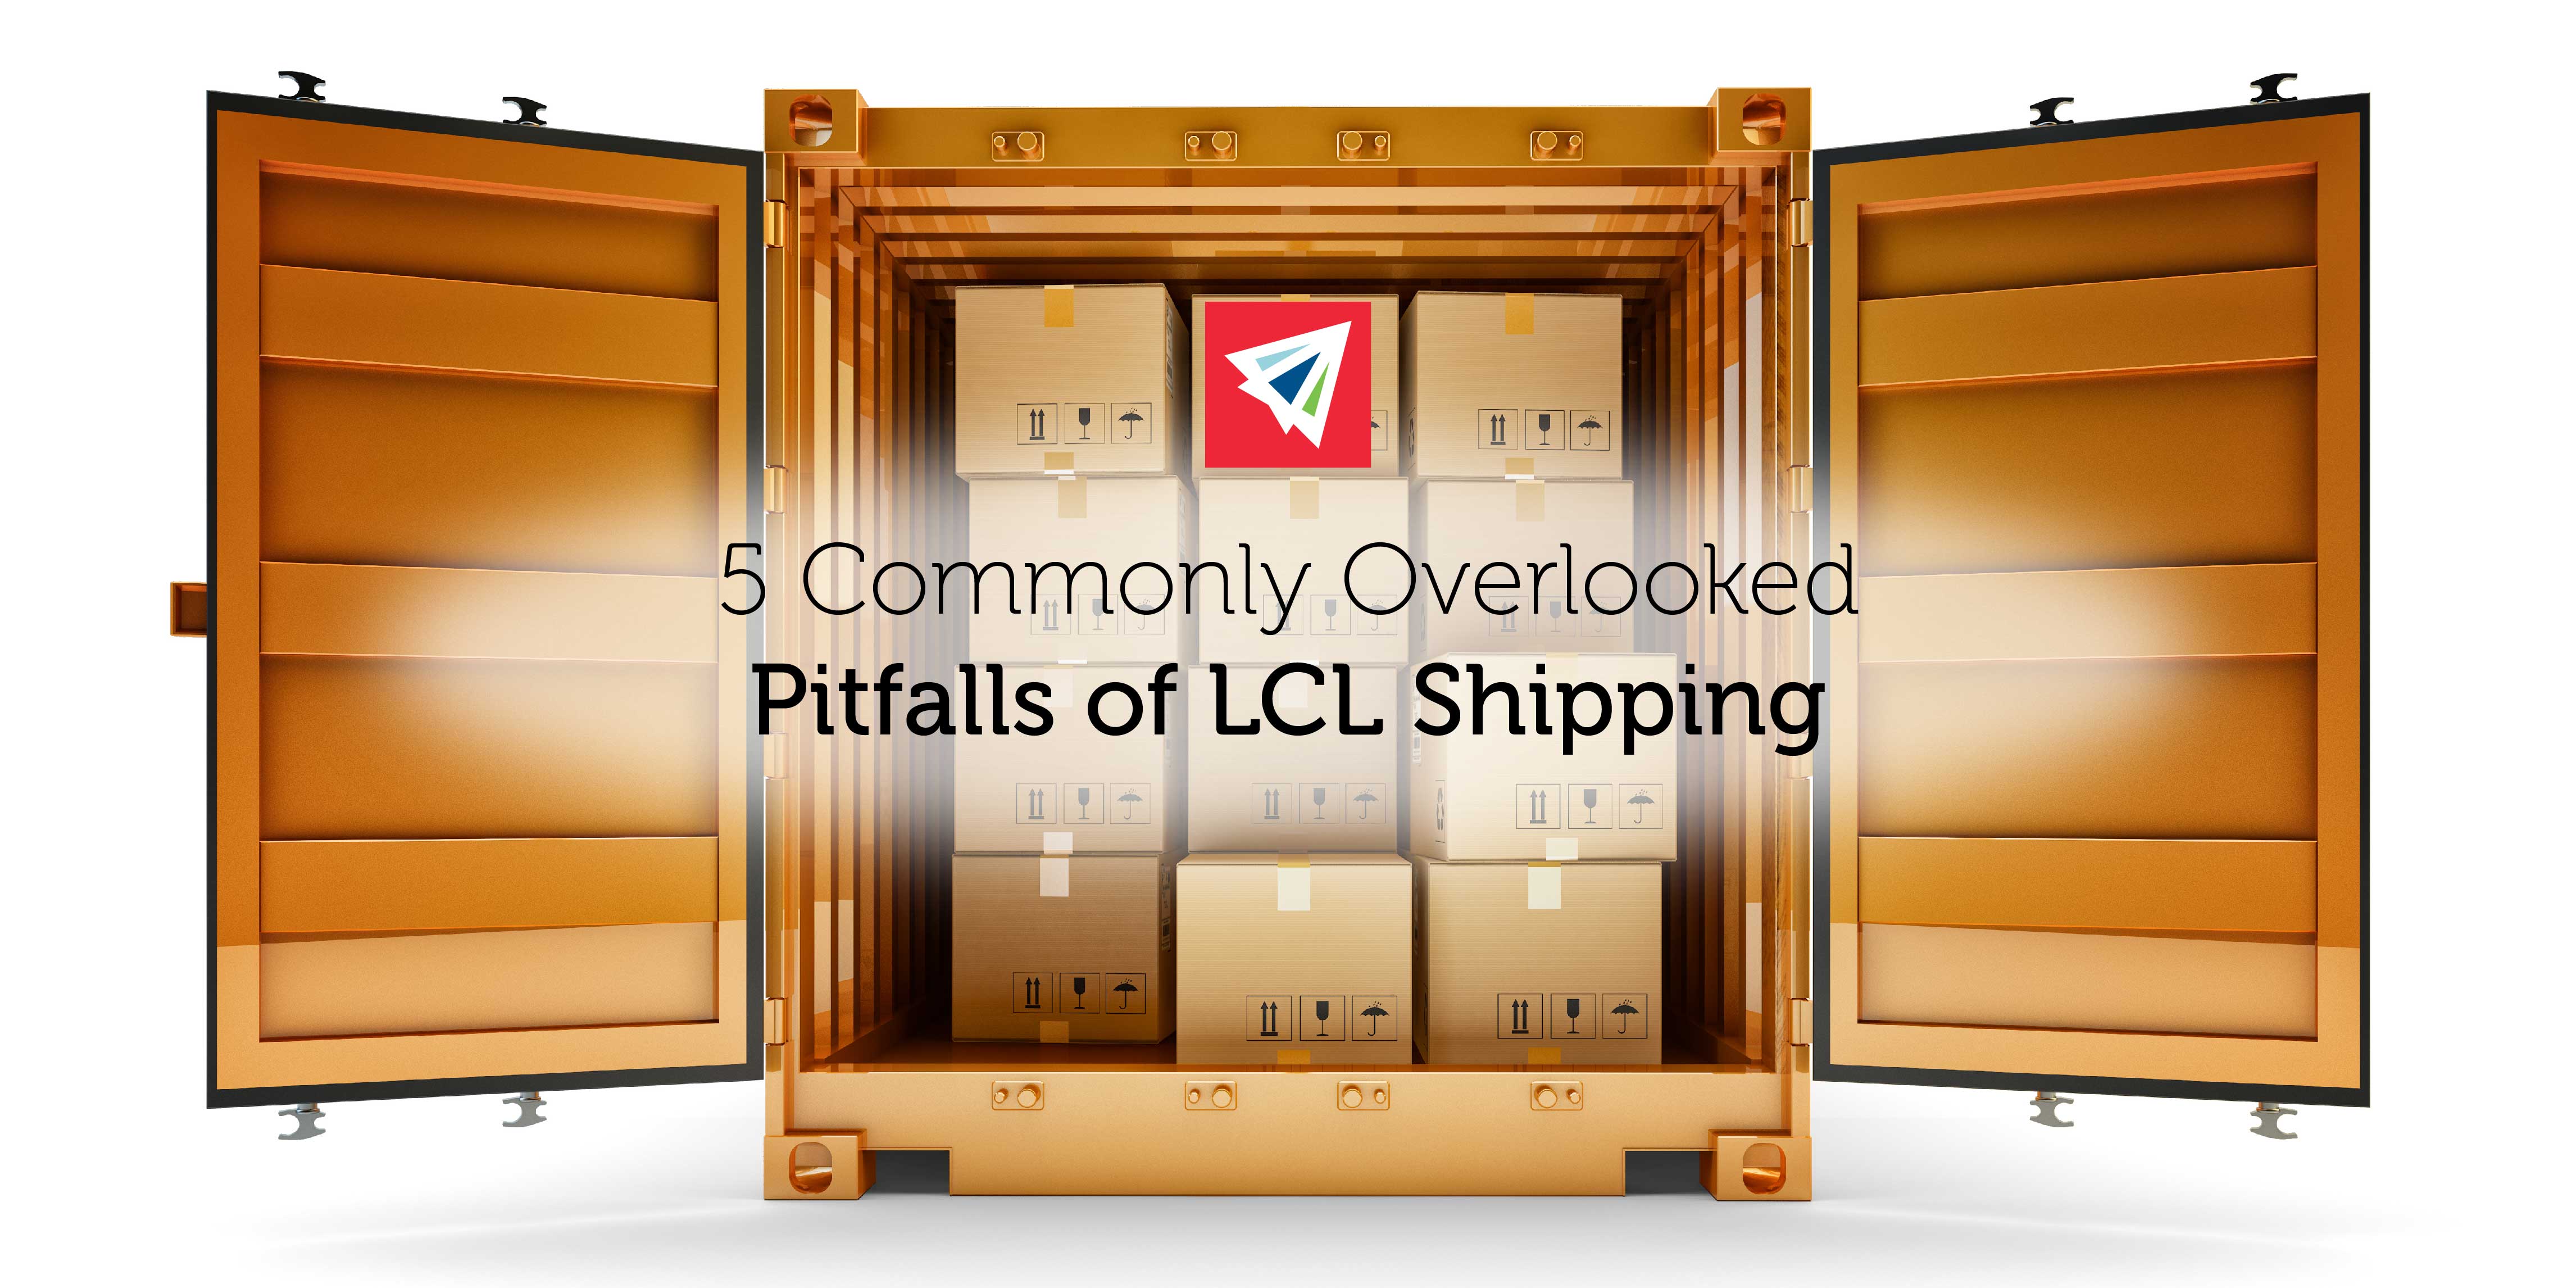 5 Commonly Overlooked Pitfalls of LCL Shipping